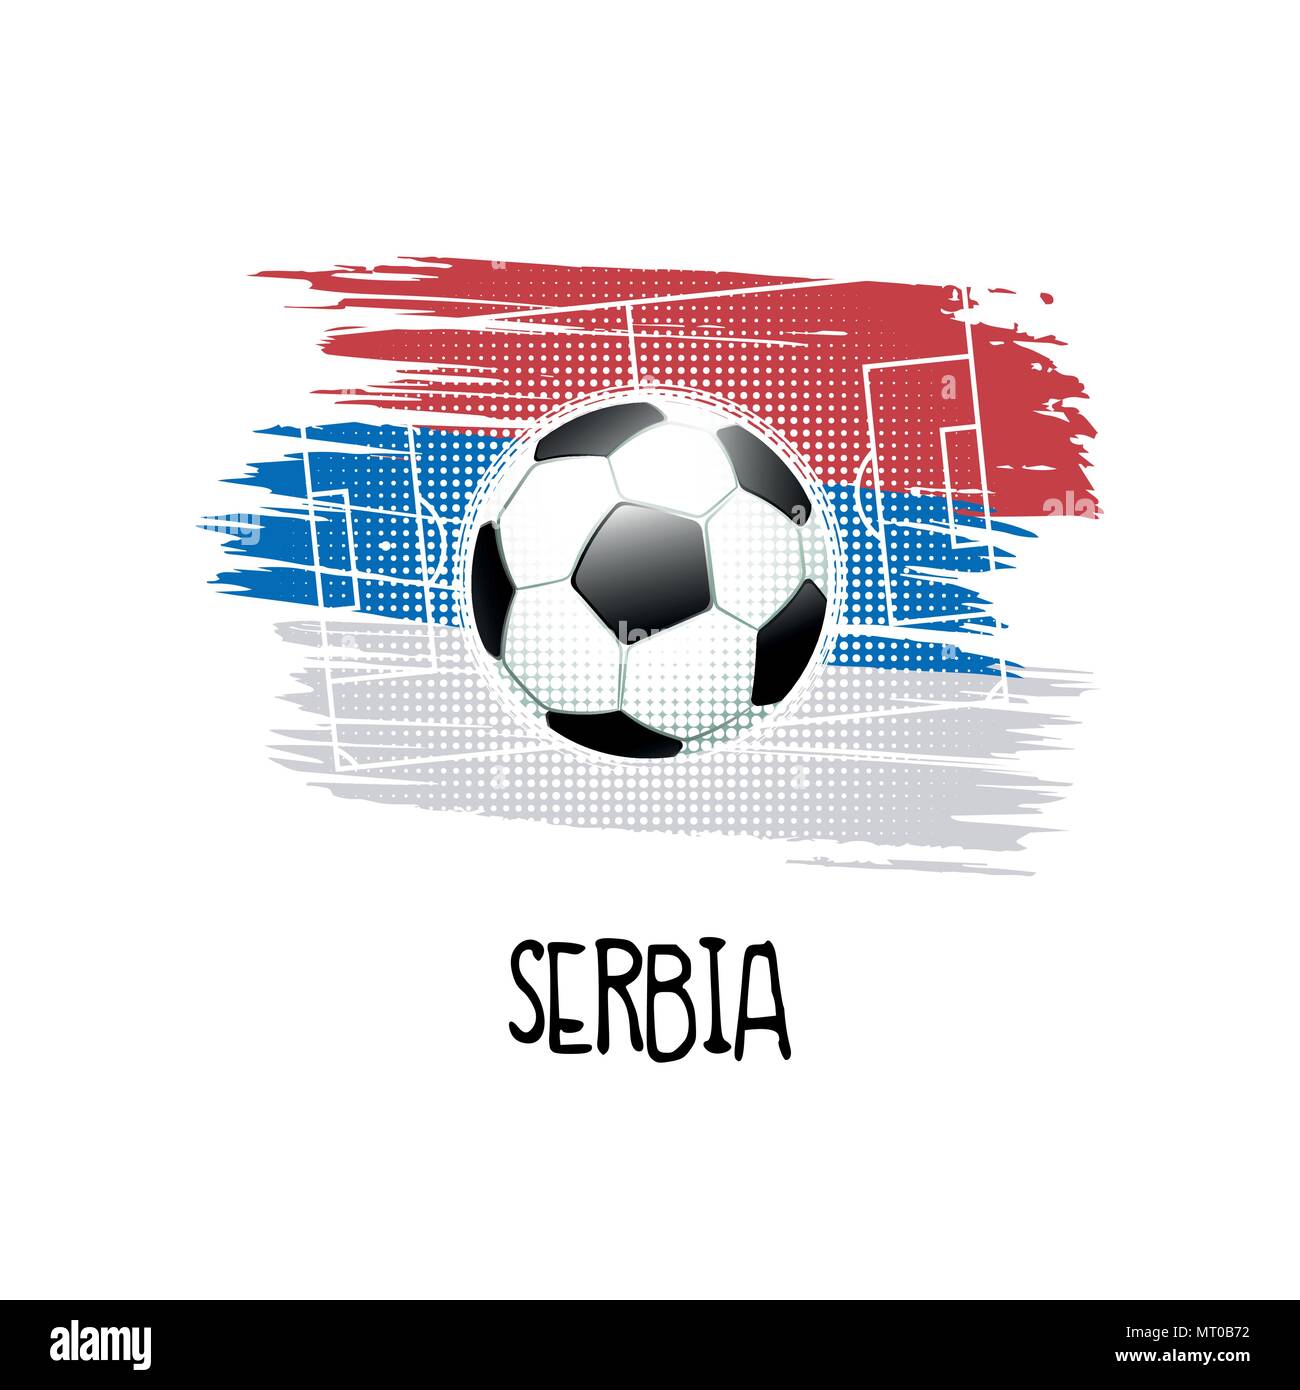 Hand written word "Serbia" with soccer ball, soccer field and abstract colors of the Serbian flag. Vector illustration. Stock Vector